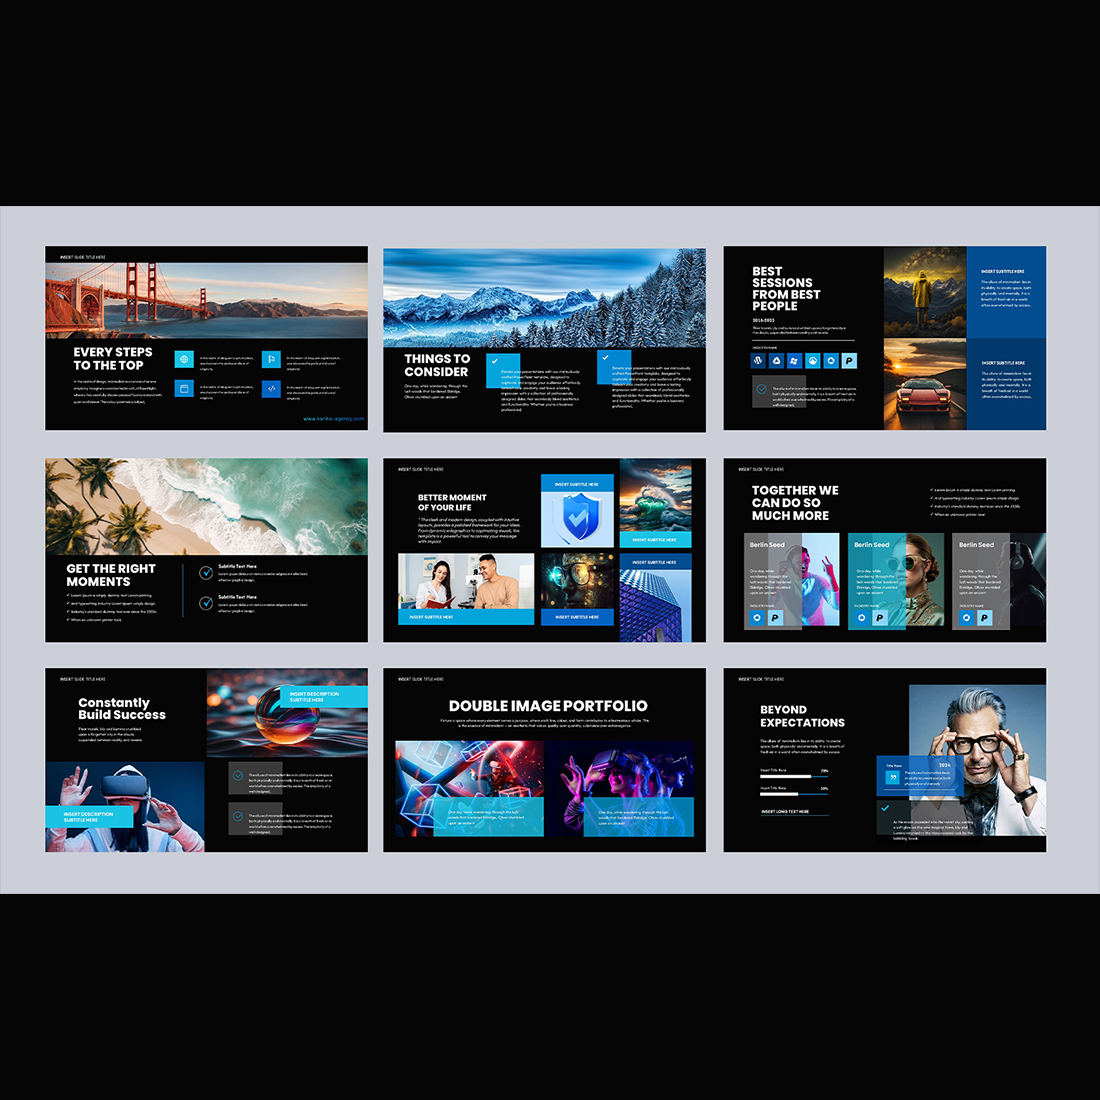 Karina Travel Agency Animated PowerPoint Presentation Template preview image.